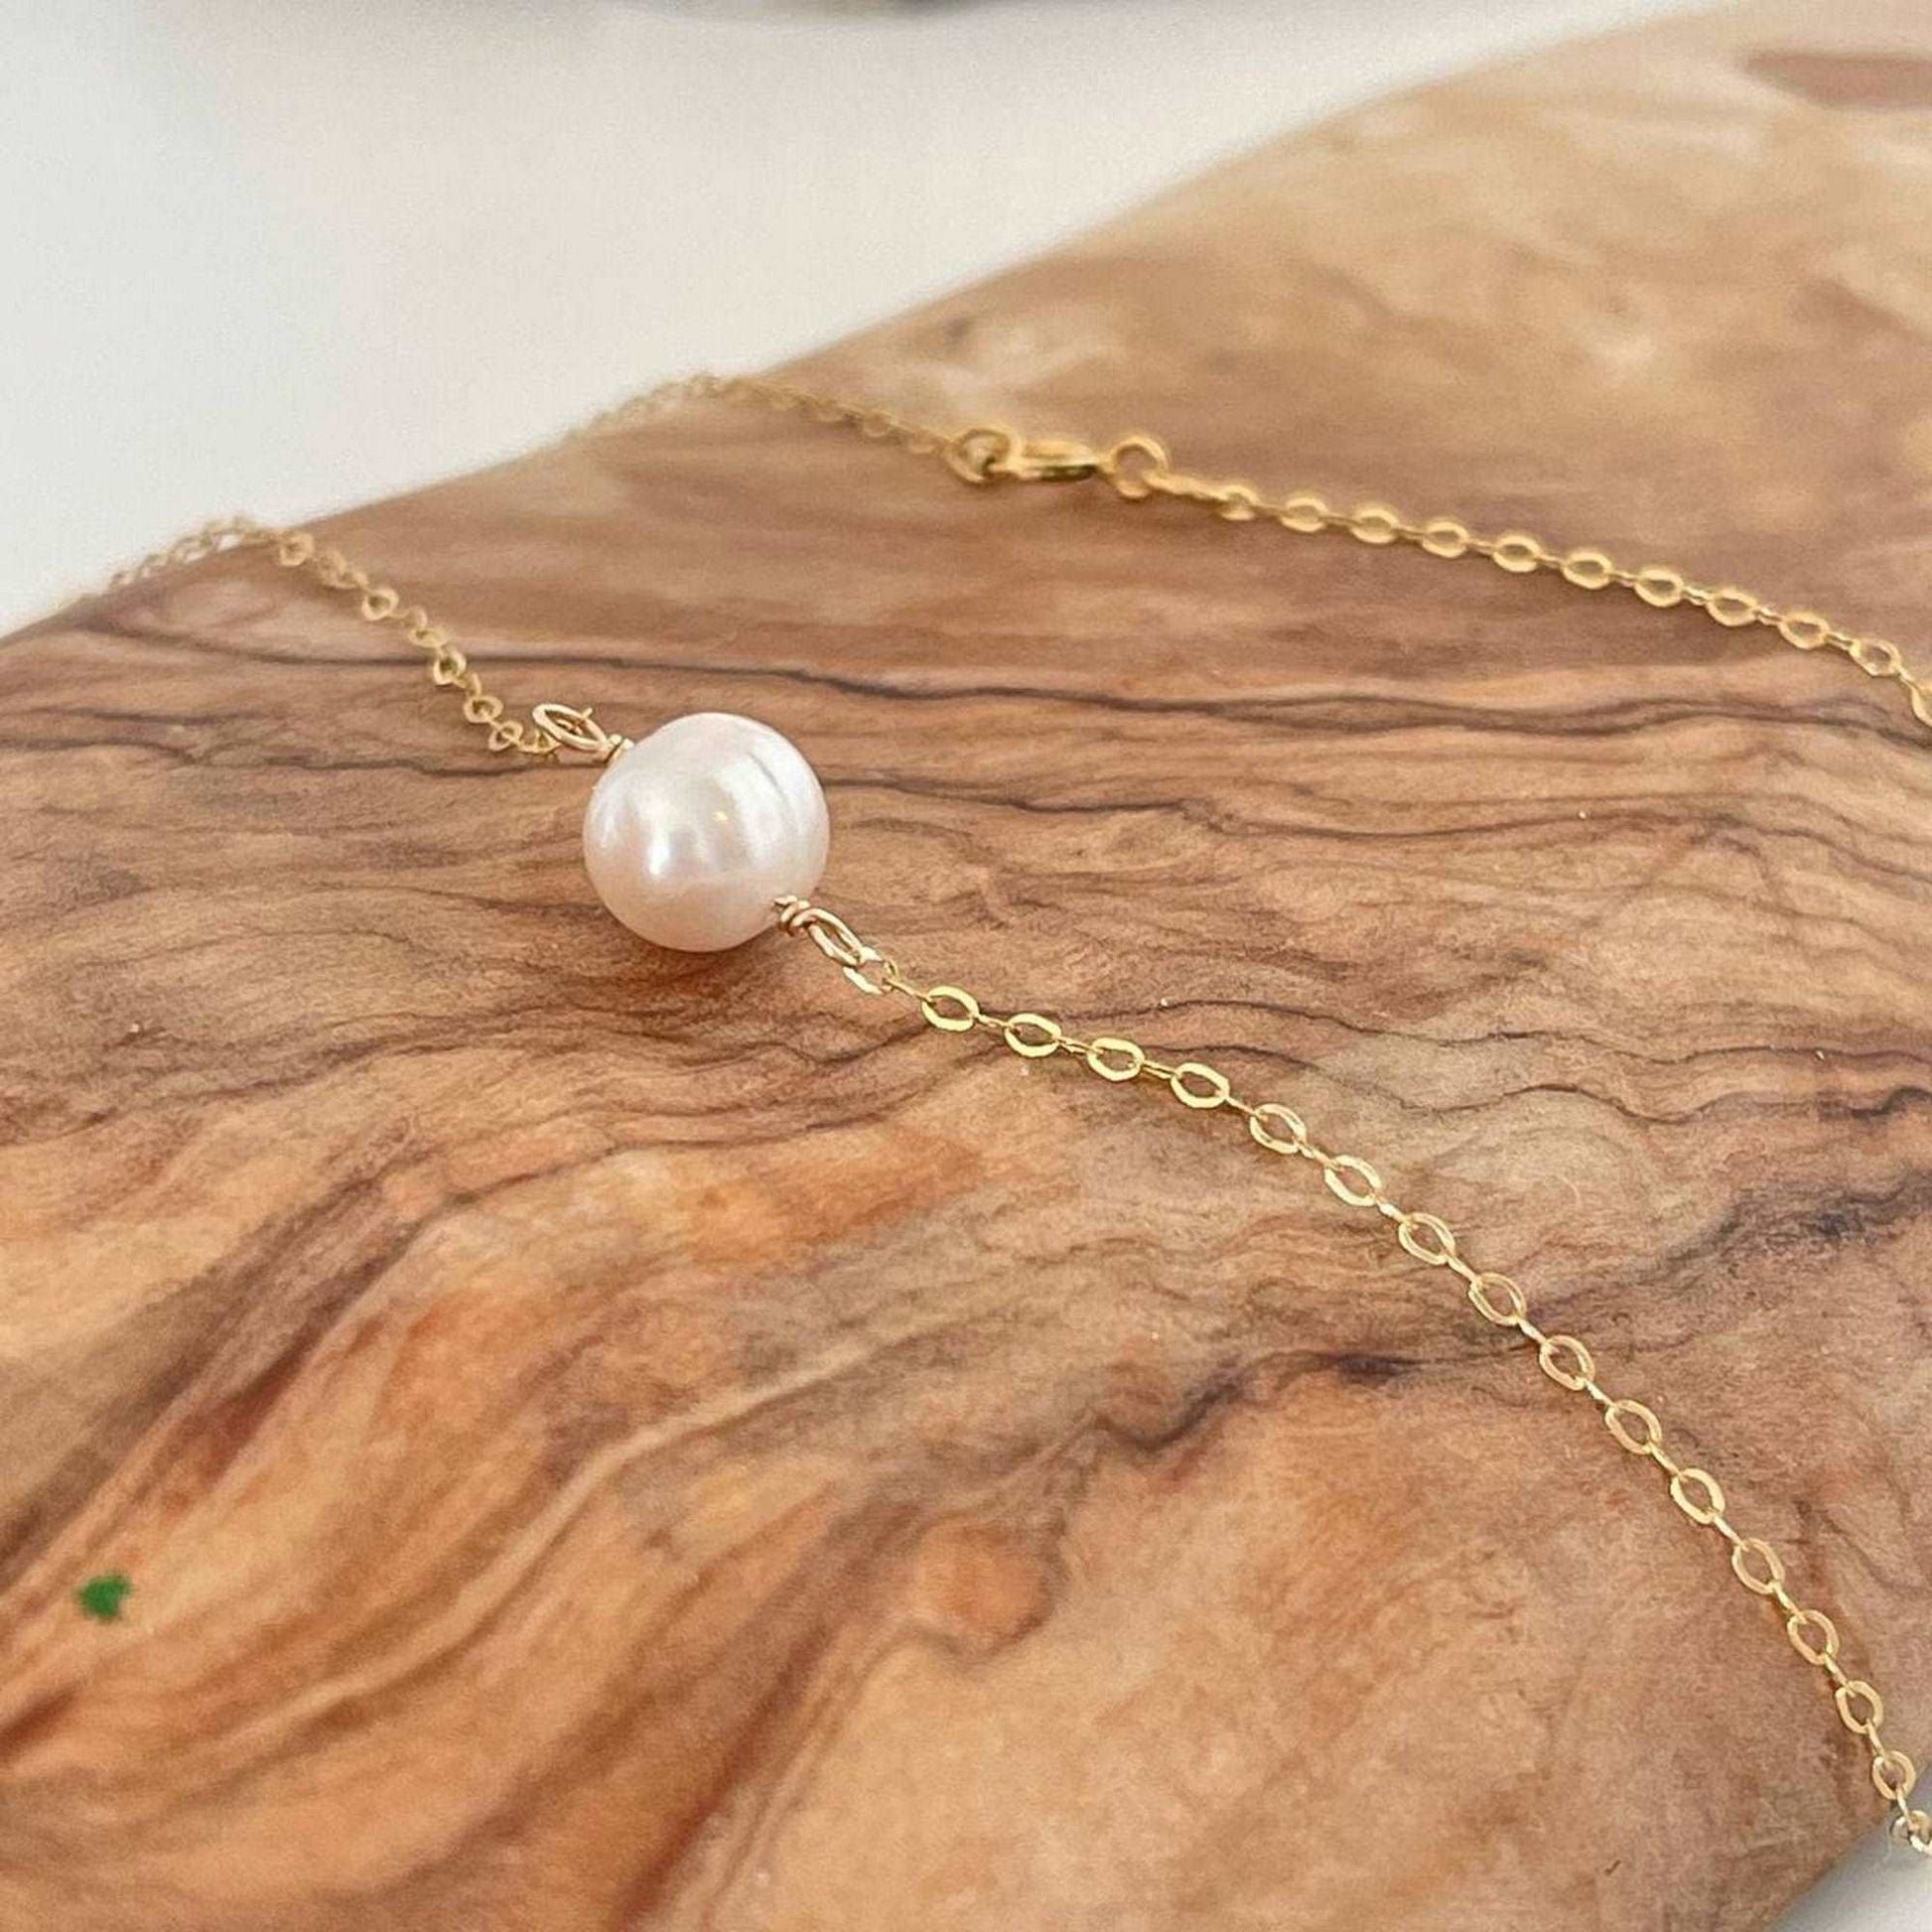 Floating Single Pearl Necklace |Simple Pearl Necklace sjewellery|sara jewellery shop toronto